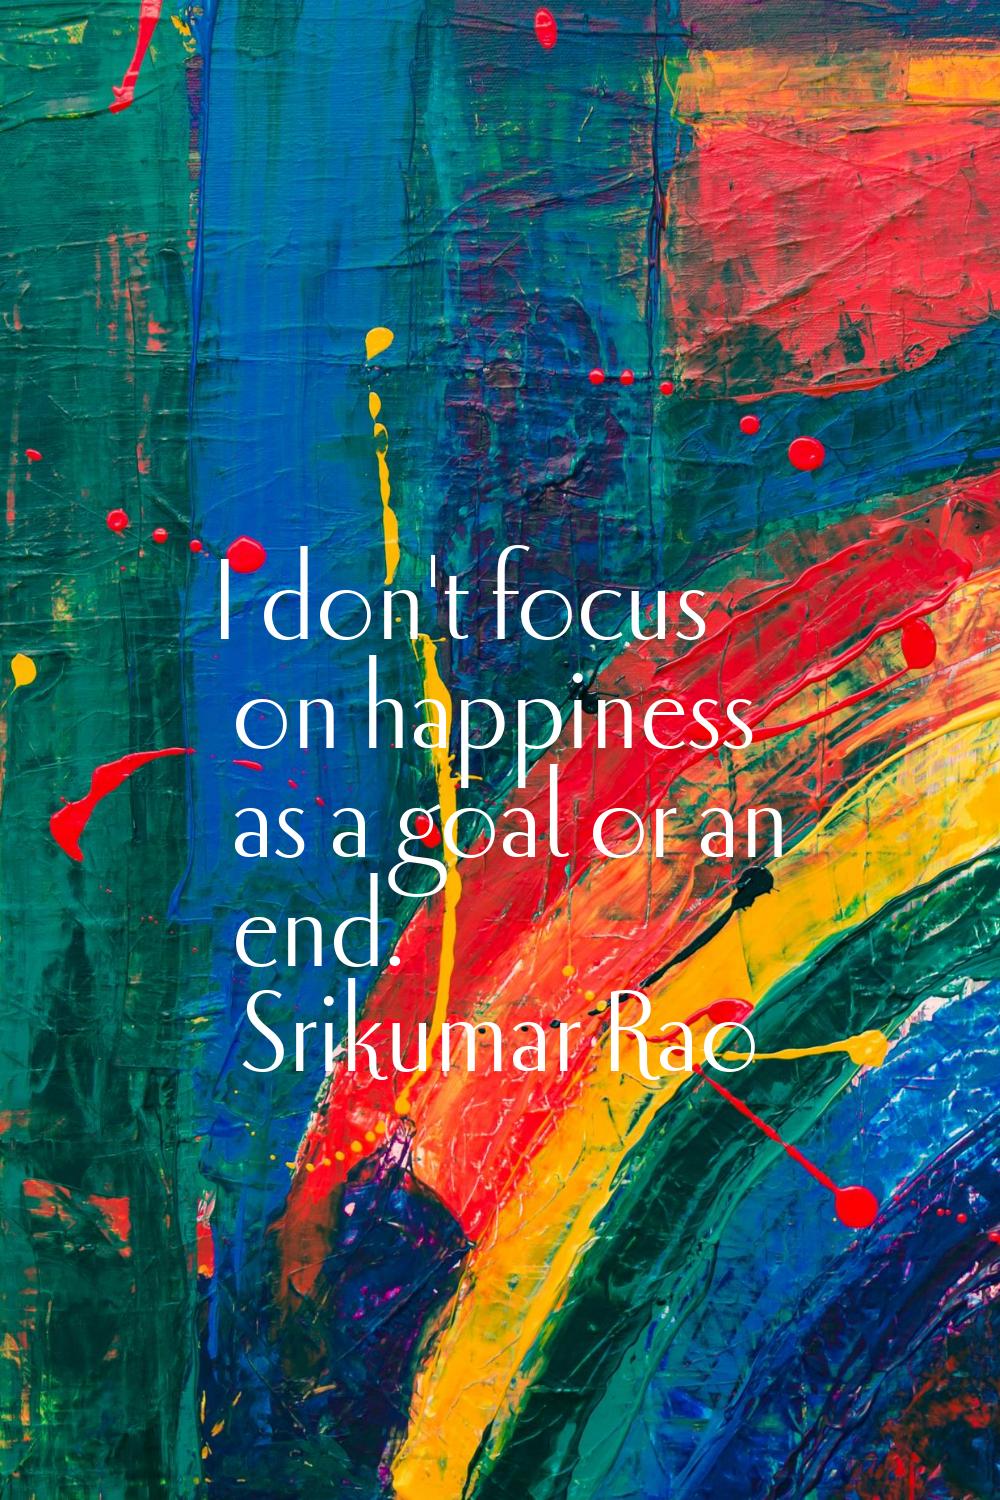 I don't focus on happiness as a goal or an end.